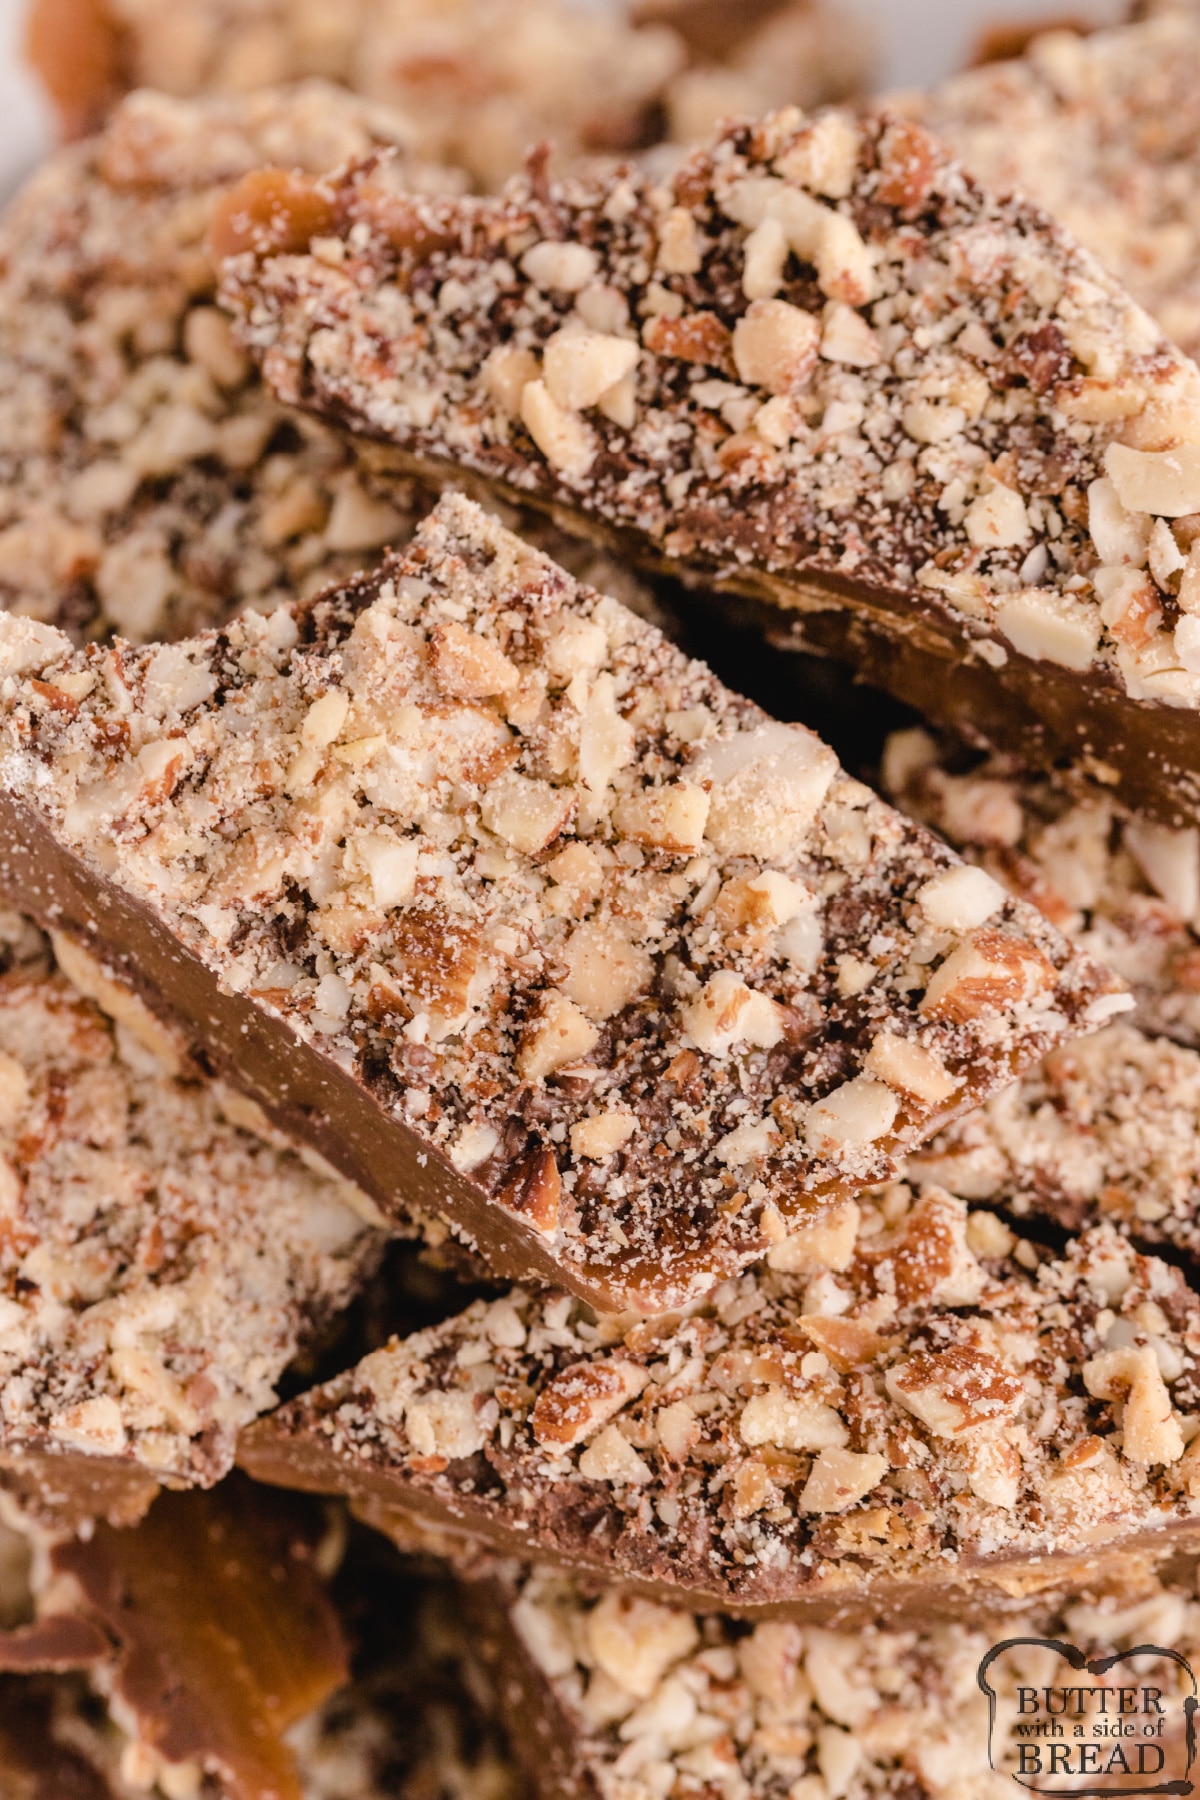 English toffee recipe made with chocolate, almonds, butter and sugar